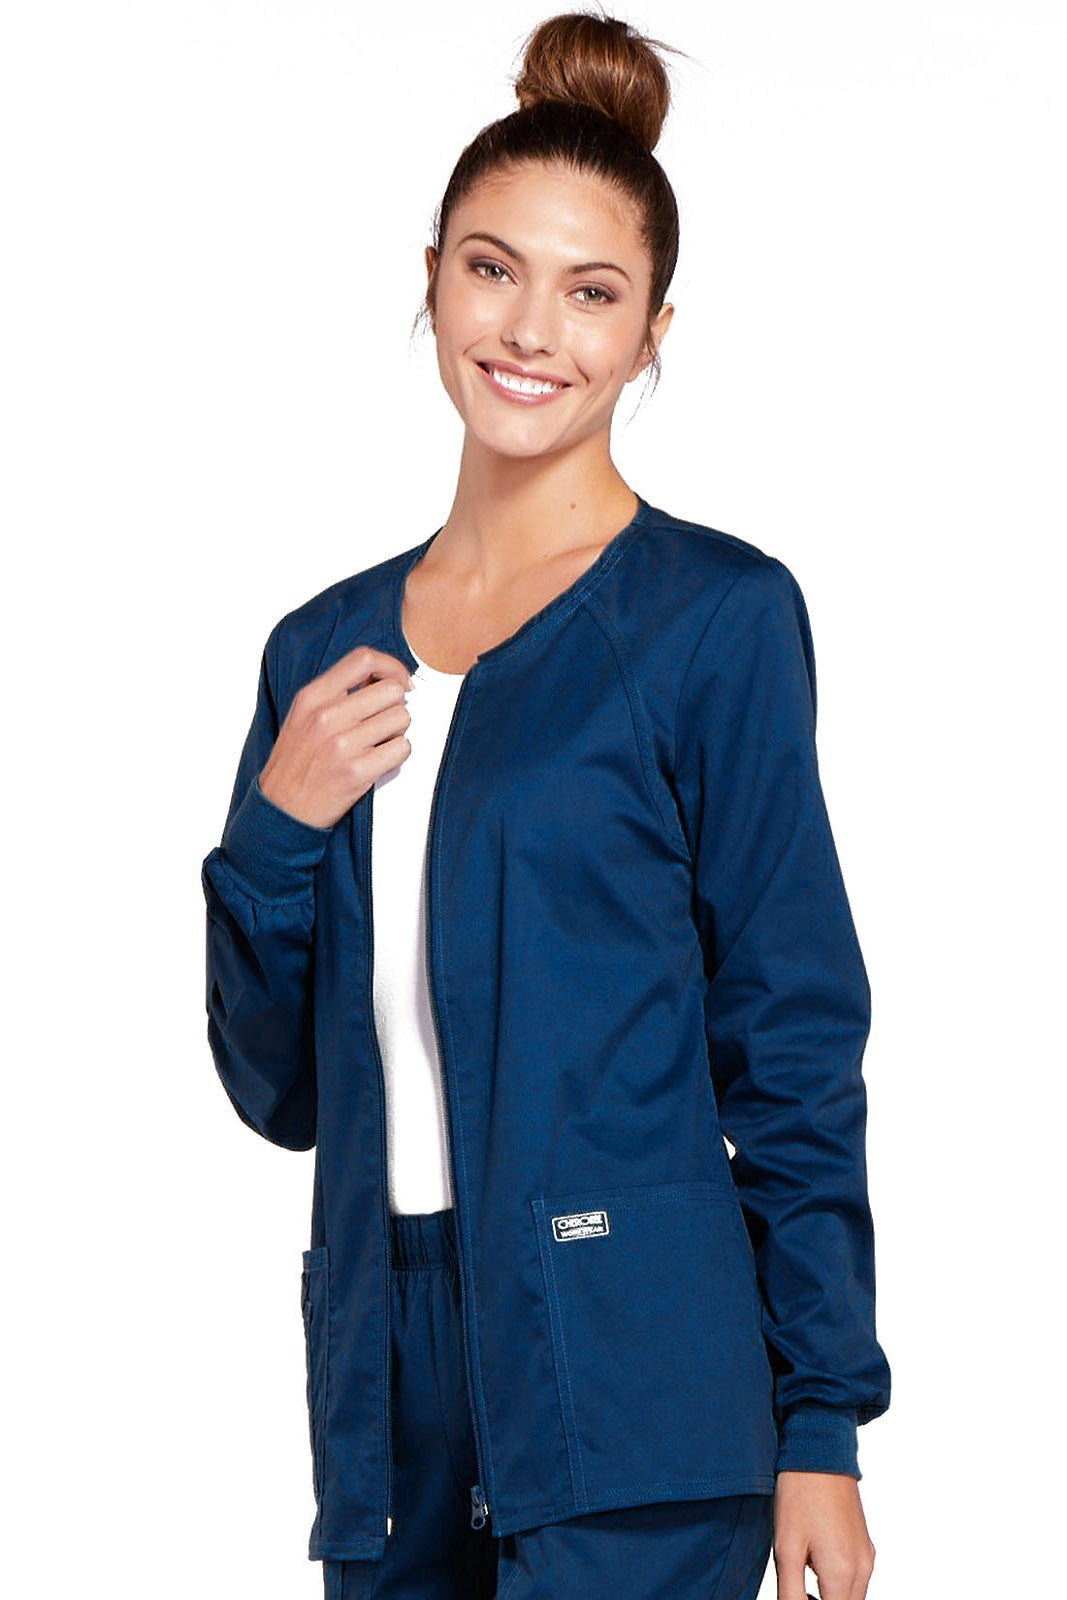 Cherokee Core Stretch Scrub Jacket Zip Front 4315 in Navy at Parker's Clothing and Shoes.